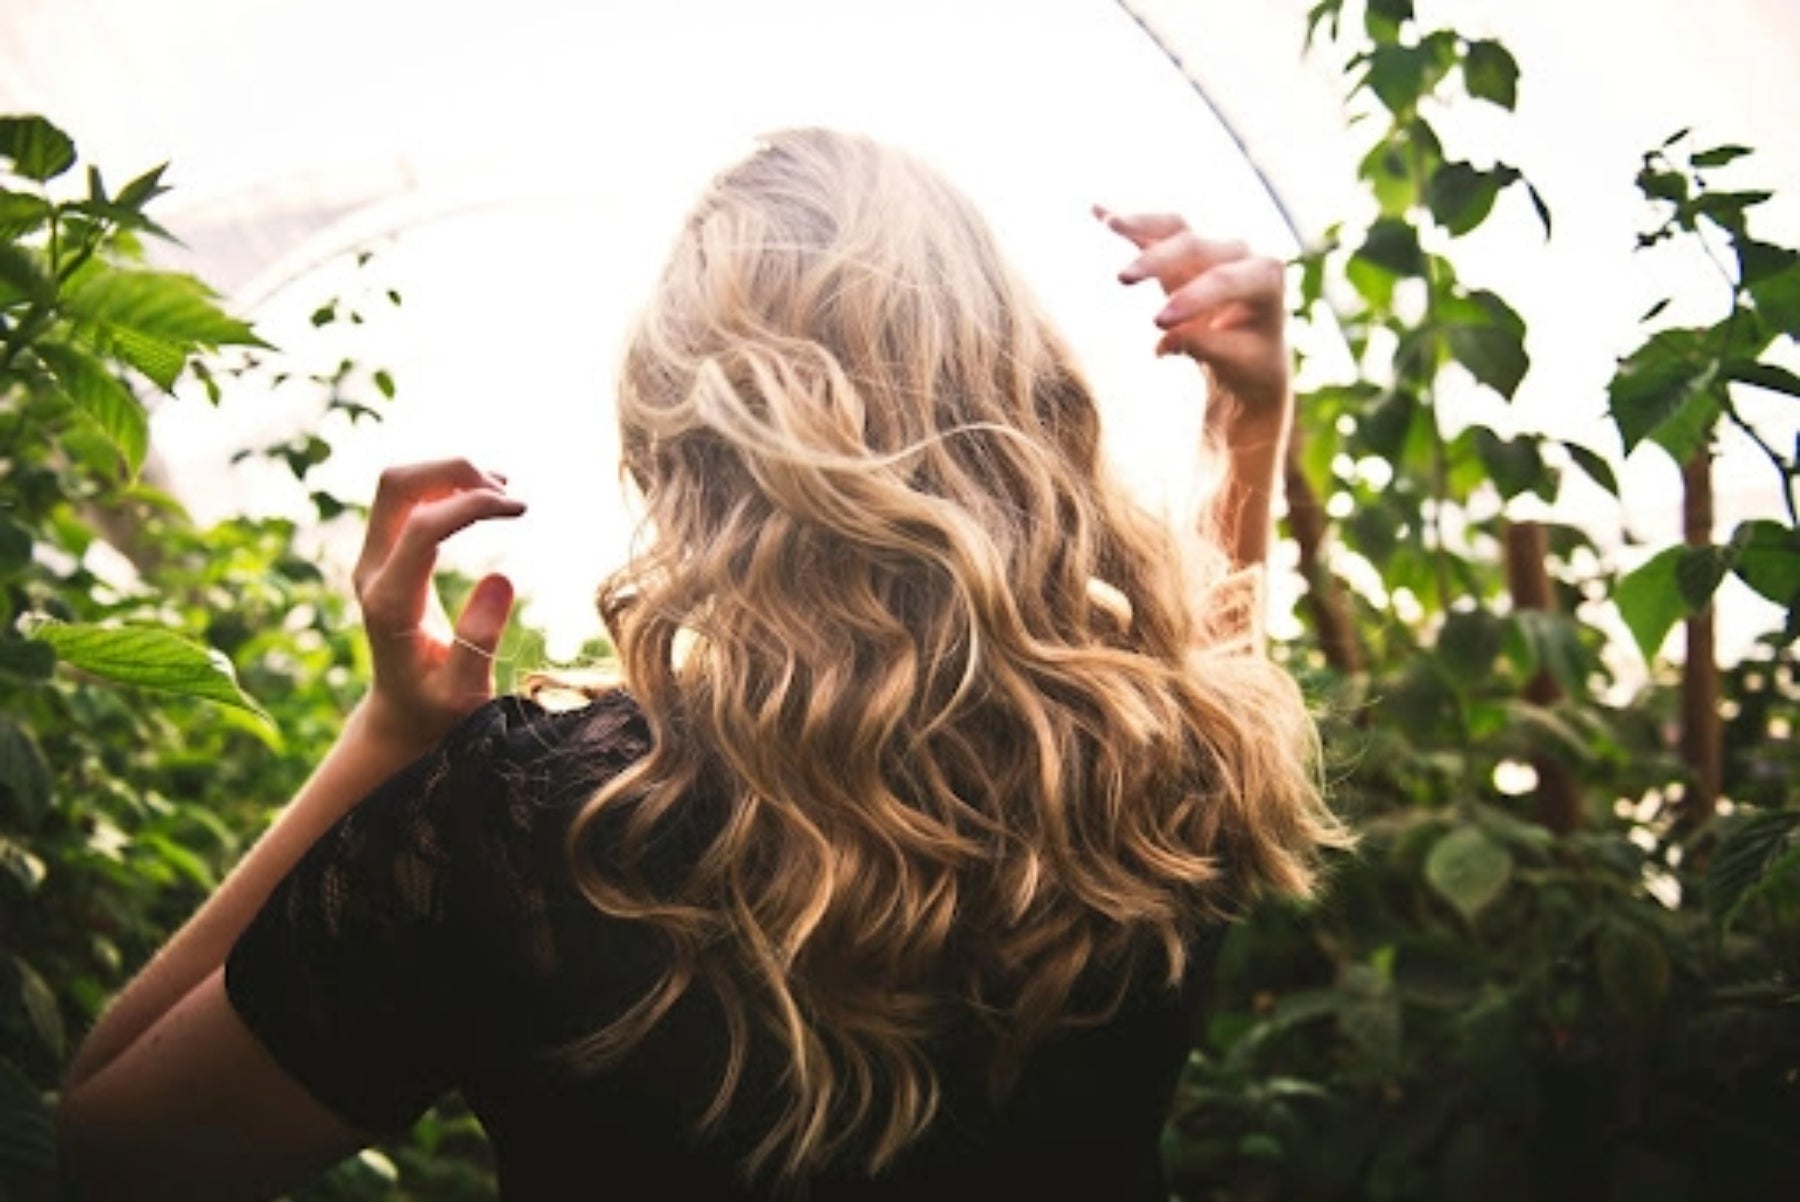 A woman with long, blonde curly hair extensions. Credit: Tim Mossholder, Pexels